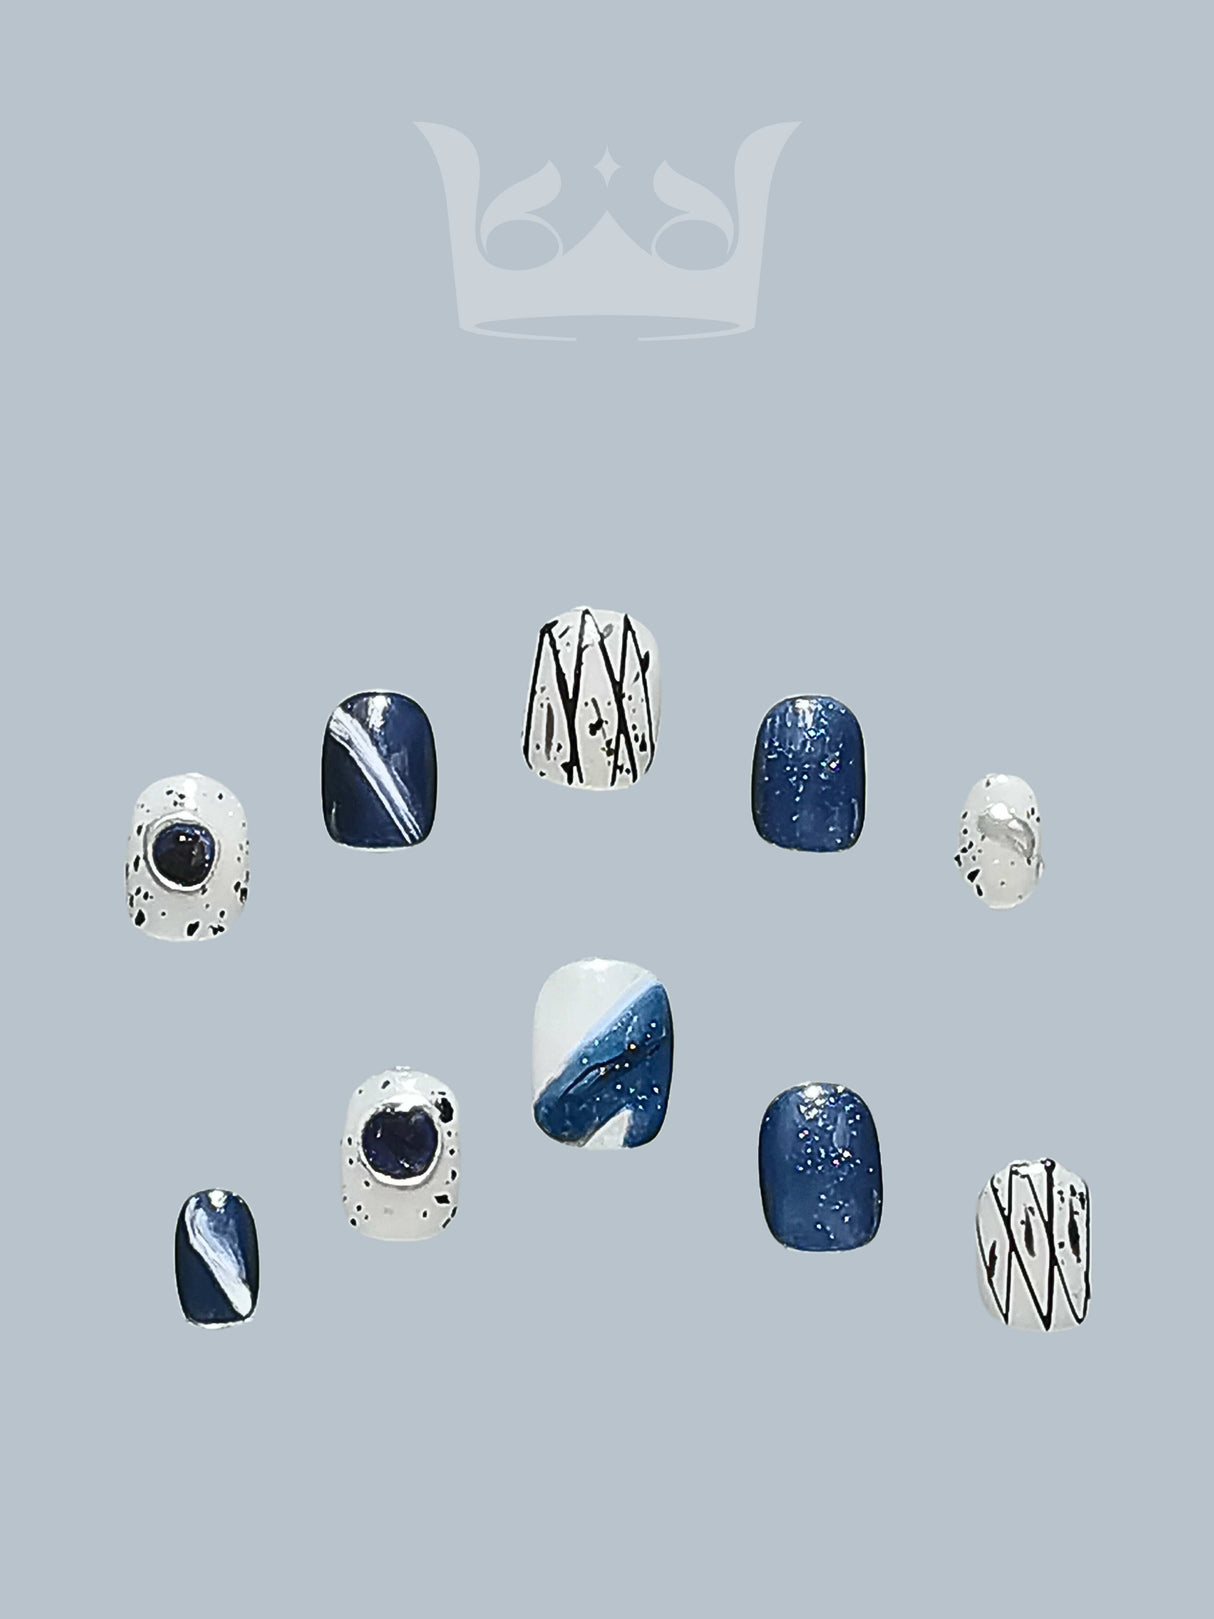 Cute nails for nail art with abstract and celestial designs, including patterns, colors, and minimalist art, perfect for expressing personal style.